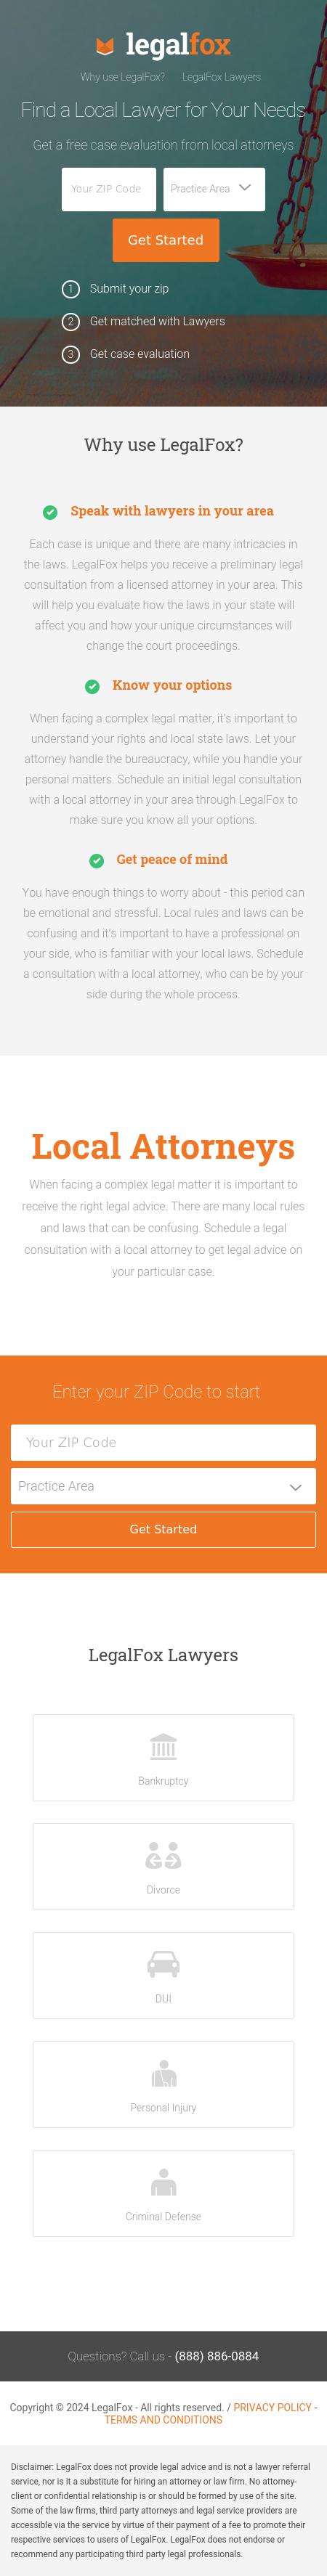 Find a Local Attorney - Mobile AL Lawyers